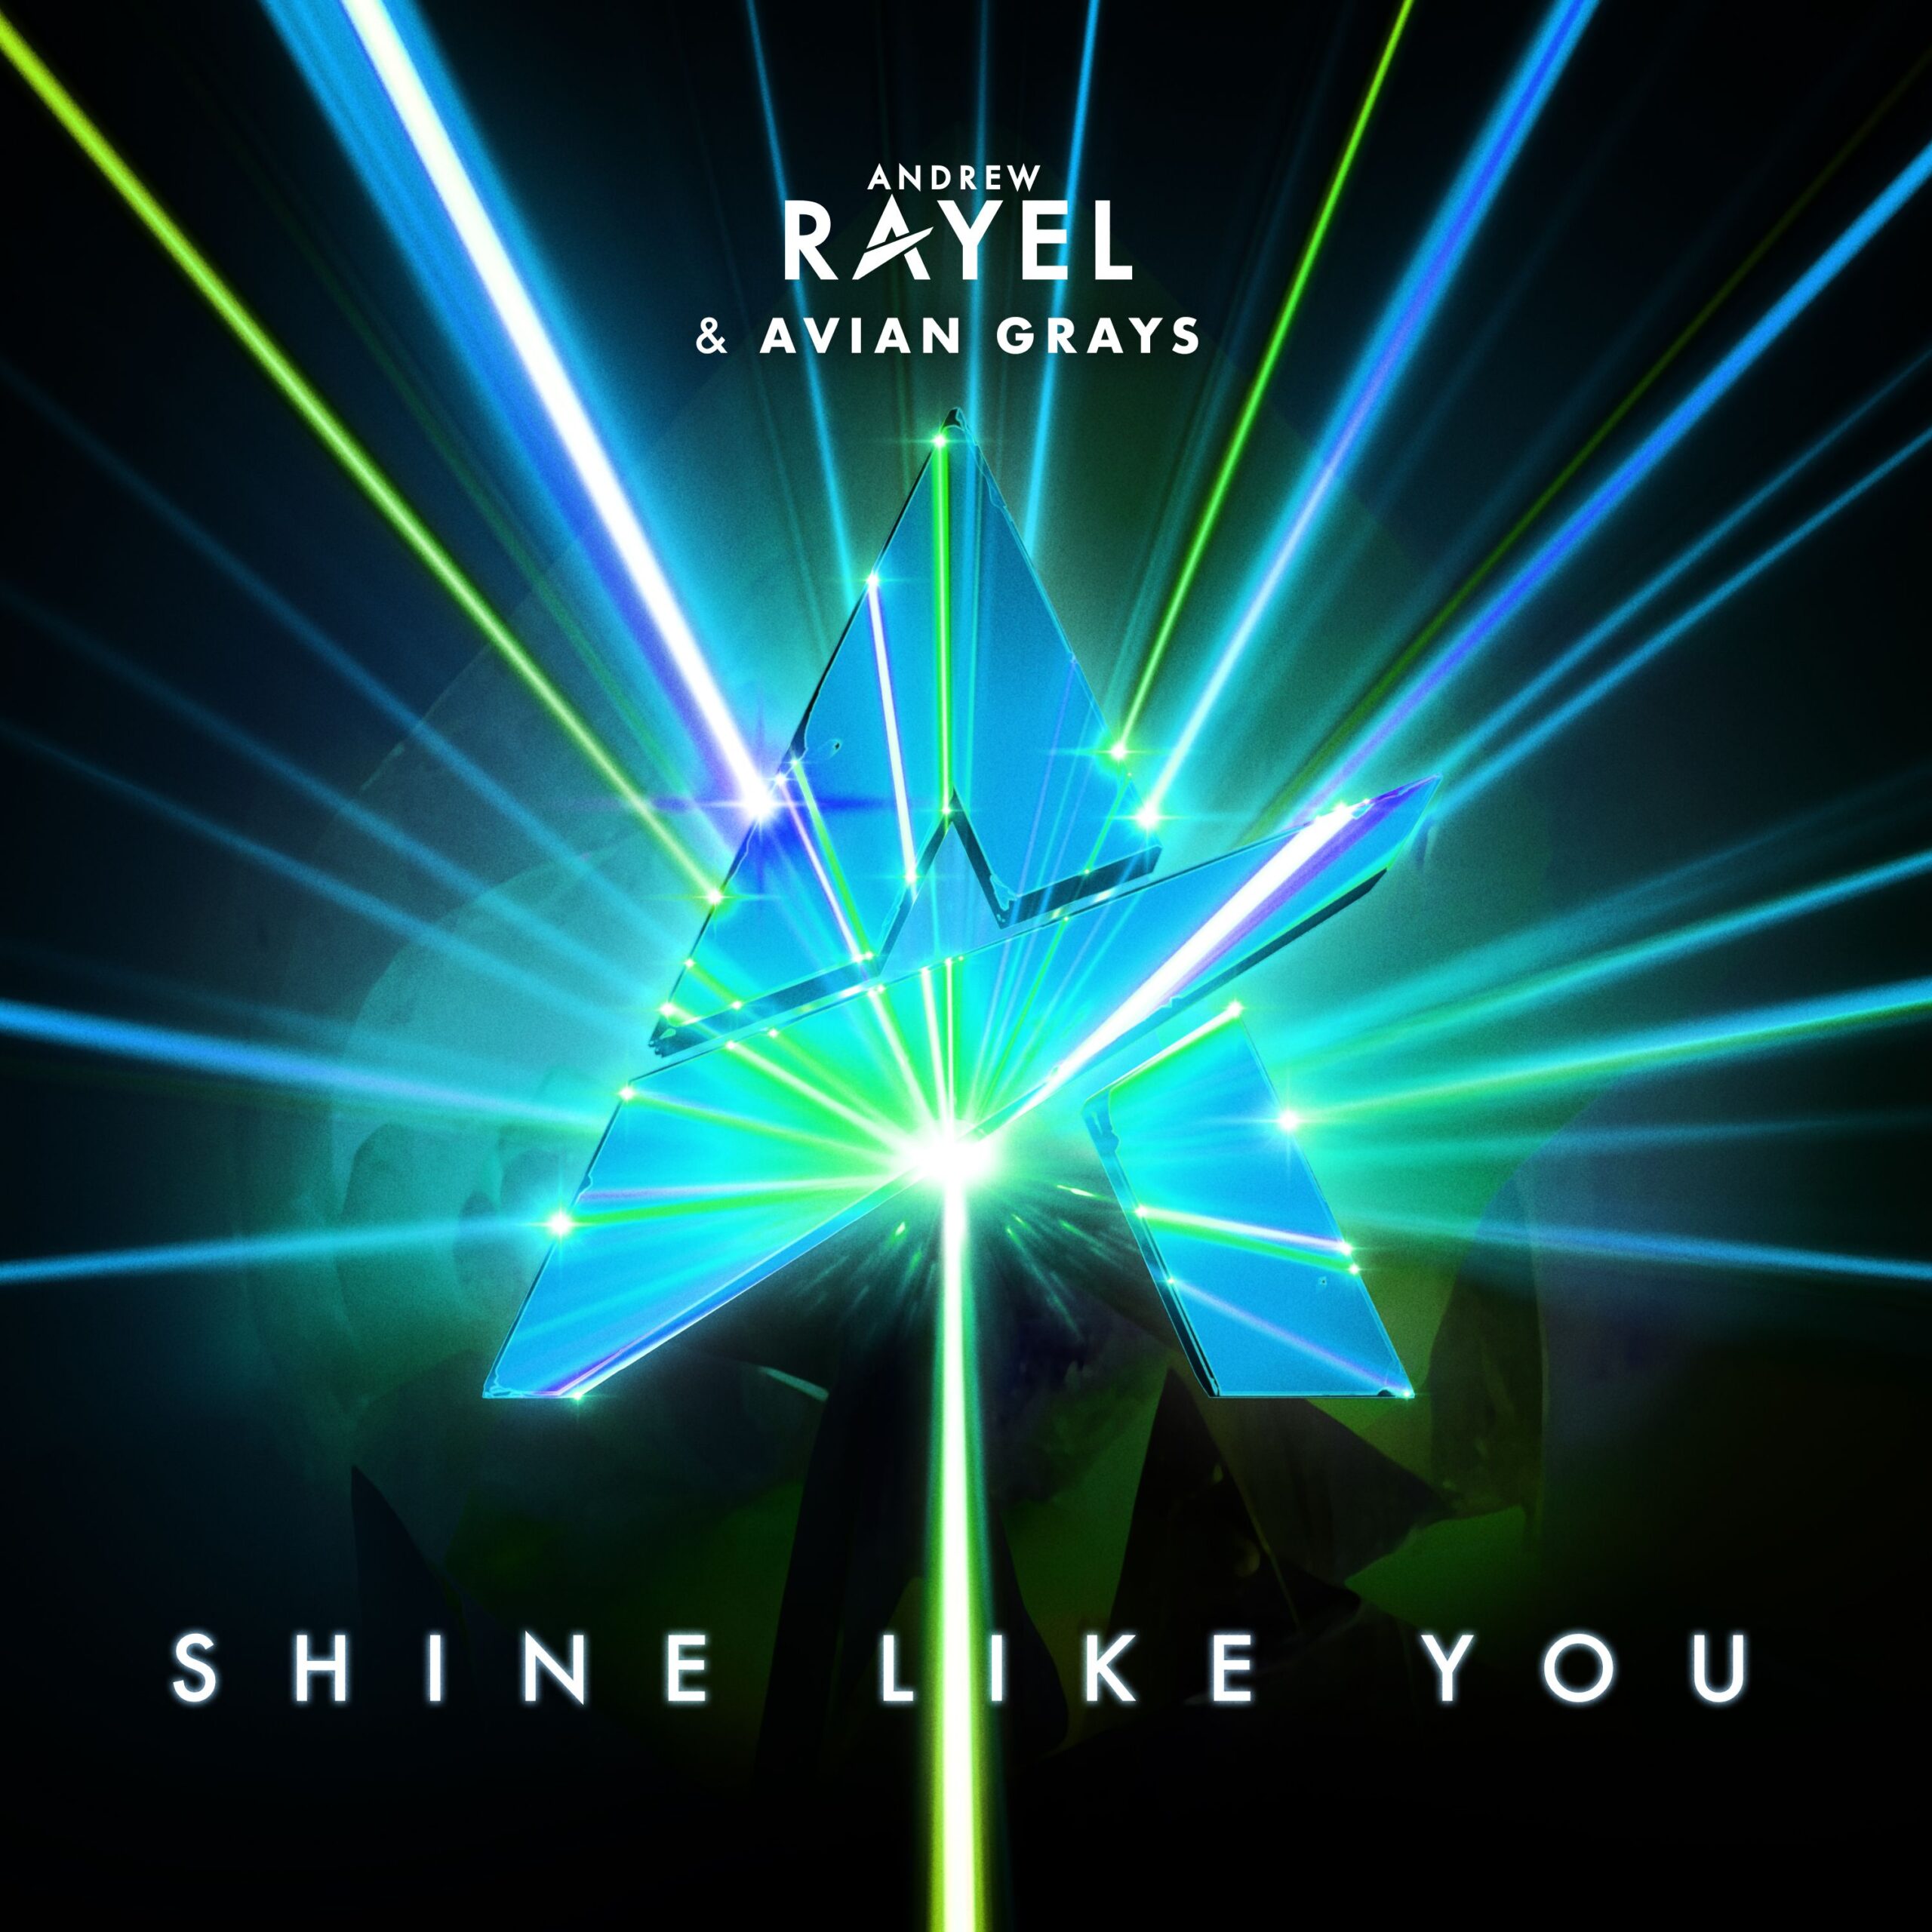 Andrew Rayel and AVIAN GRAYS presents Shine Like You on Find Your Harmony